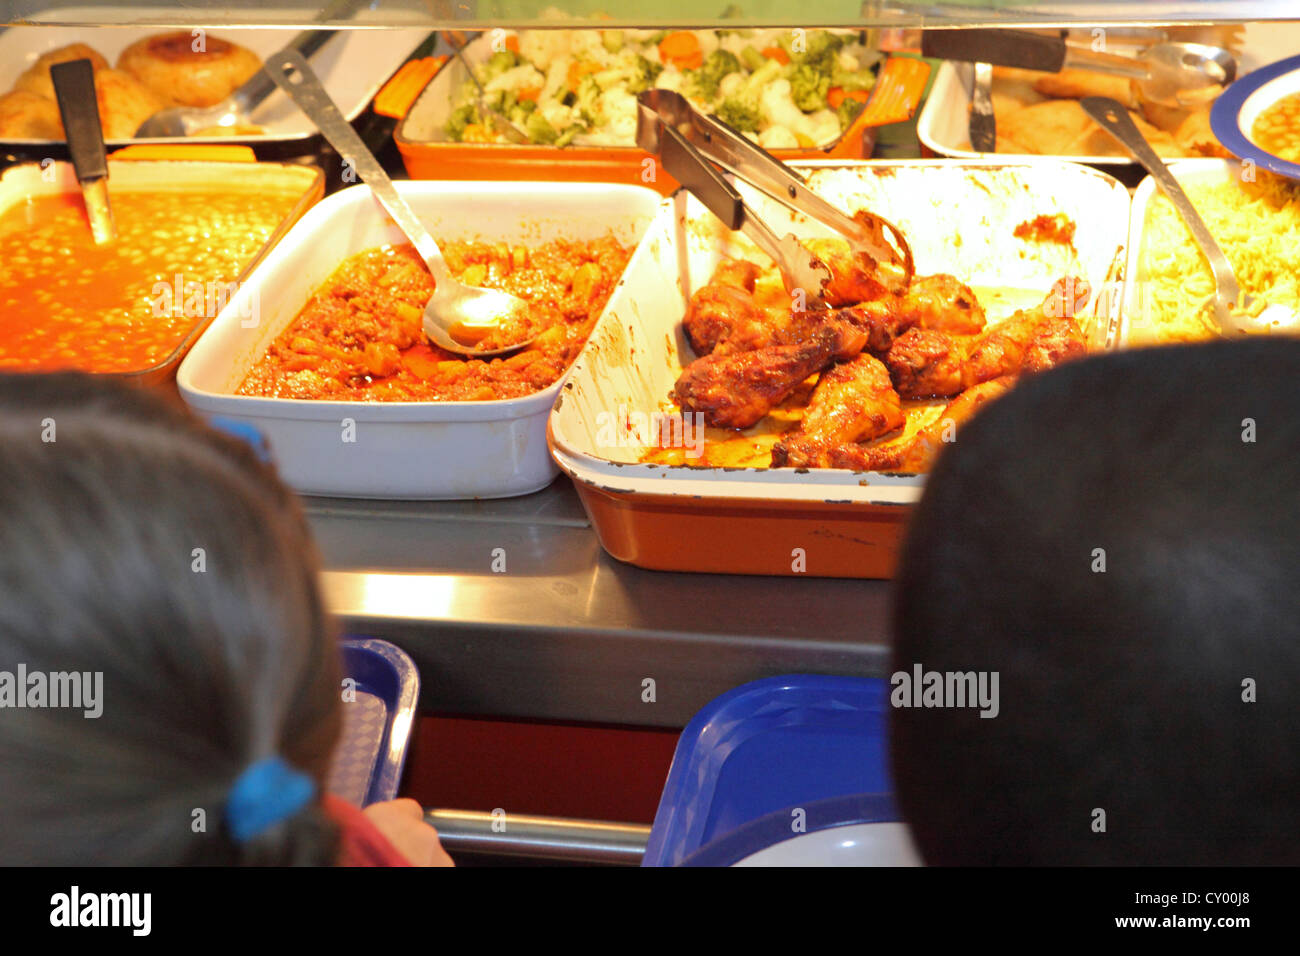 London Primary School, UK. Children queuing for hot lunch at refectory canteen. NB Cannot be recognized Stock Photo